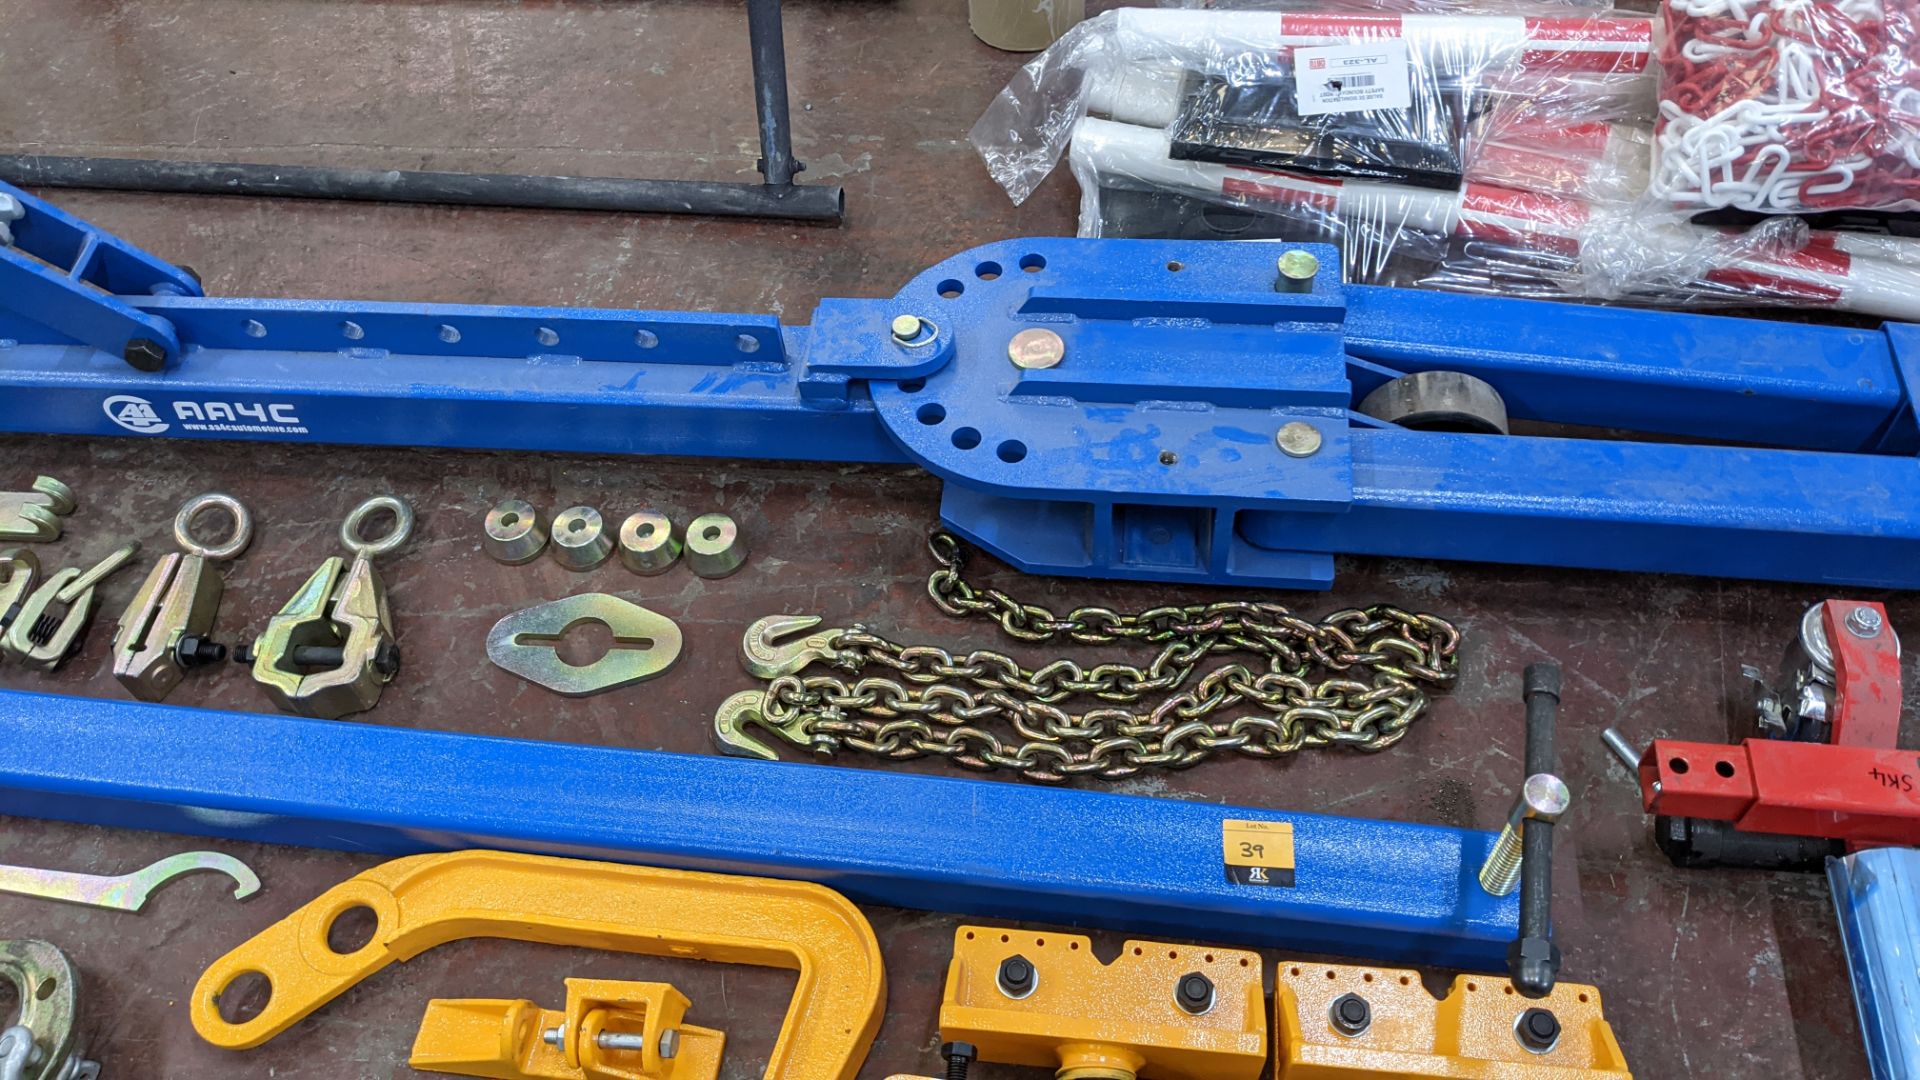 2019 AA4C auto repair bench model AA-ACR169. Please note this lot comprises the large blue metal fr - Image 18 of 32